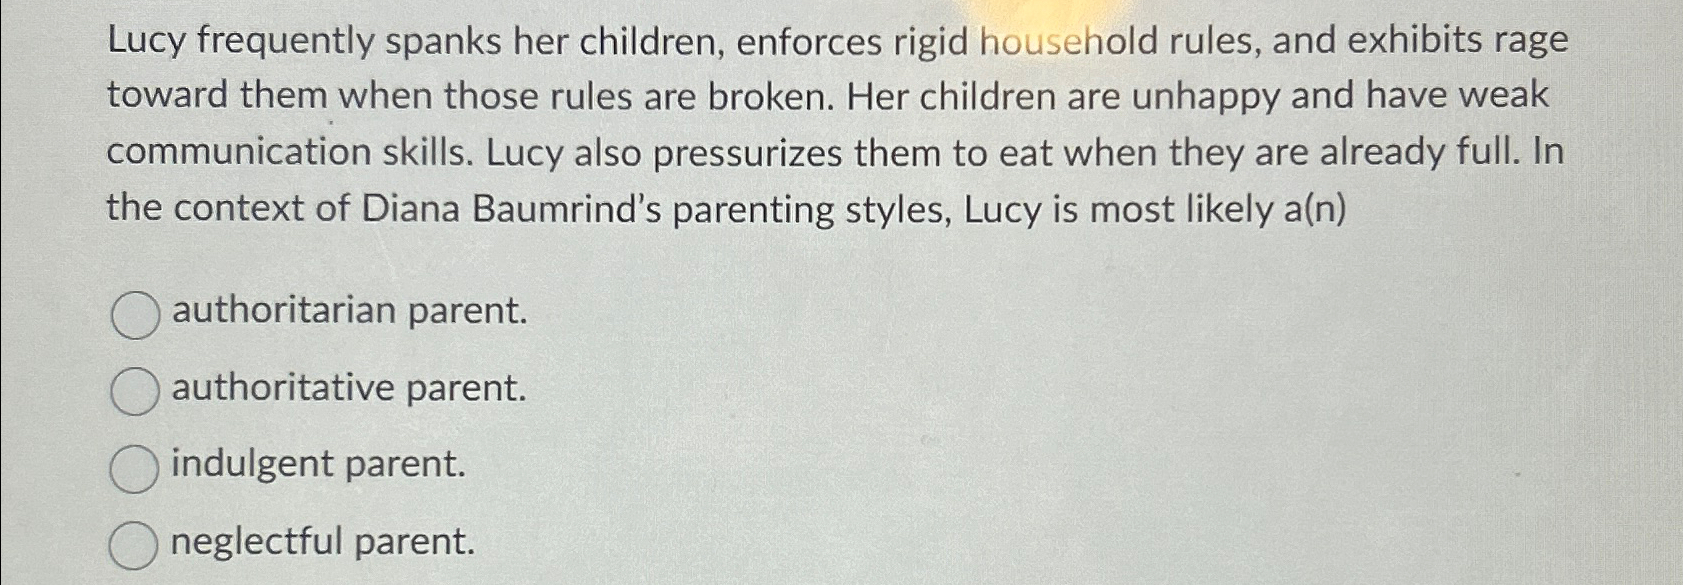 Solved Lucy frequently spanks her children, enforces rigid